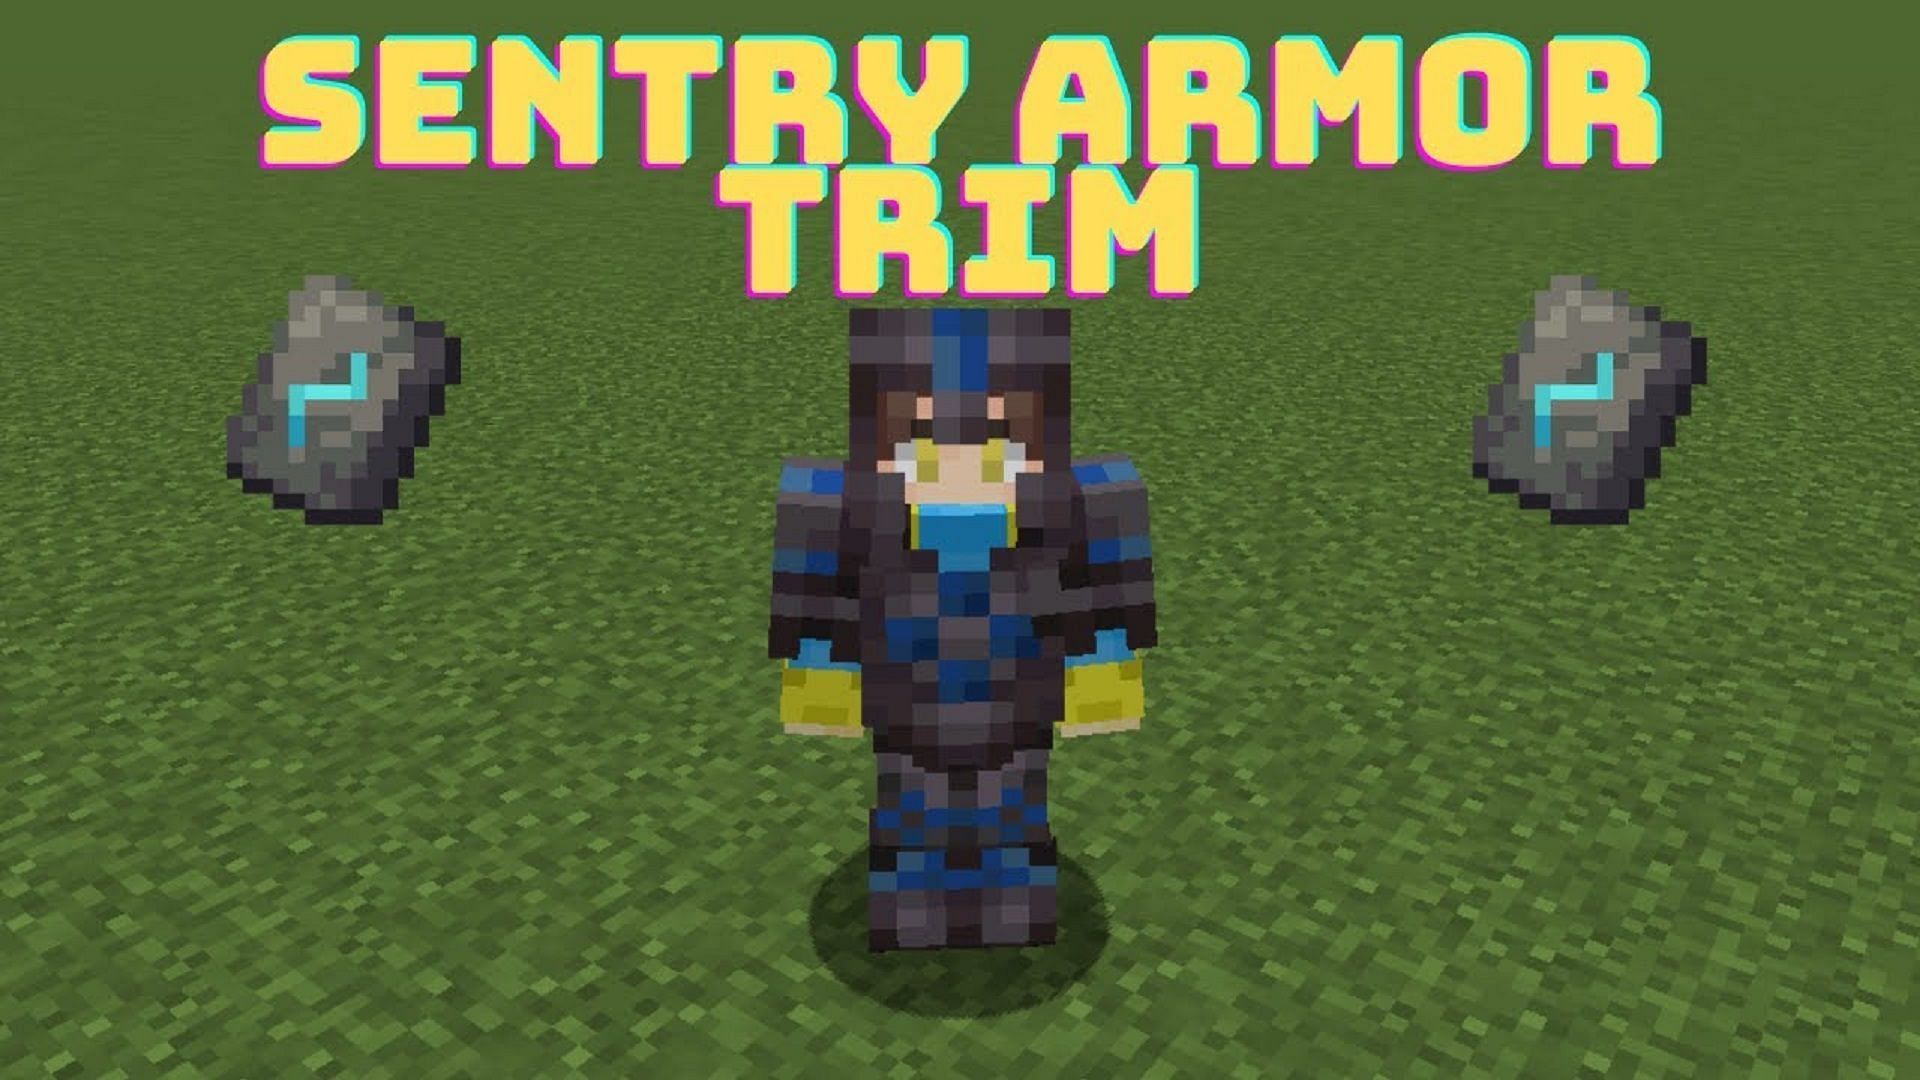 Sentry armor trims have a particularly interesting geometric design (Image via FoxTroTGable/YouTube)